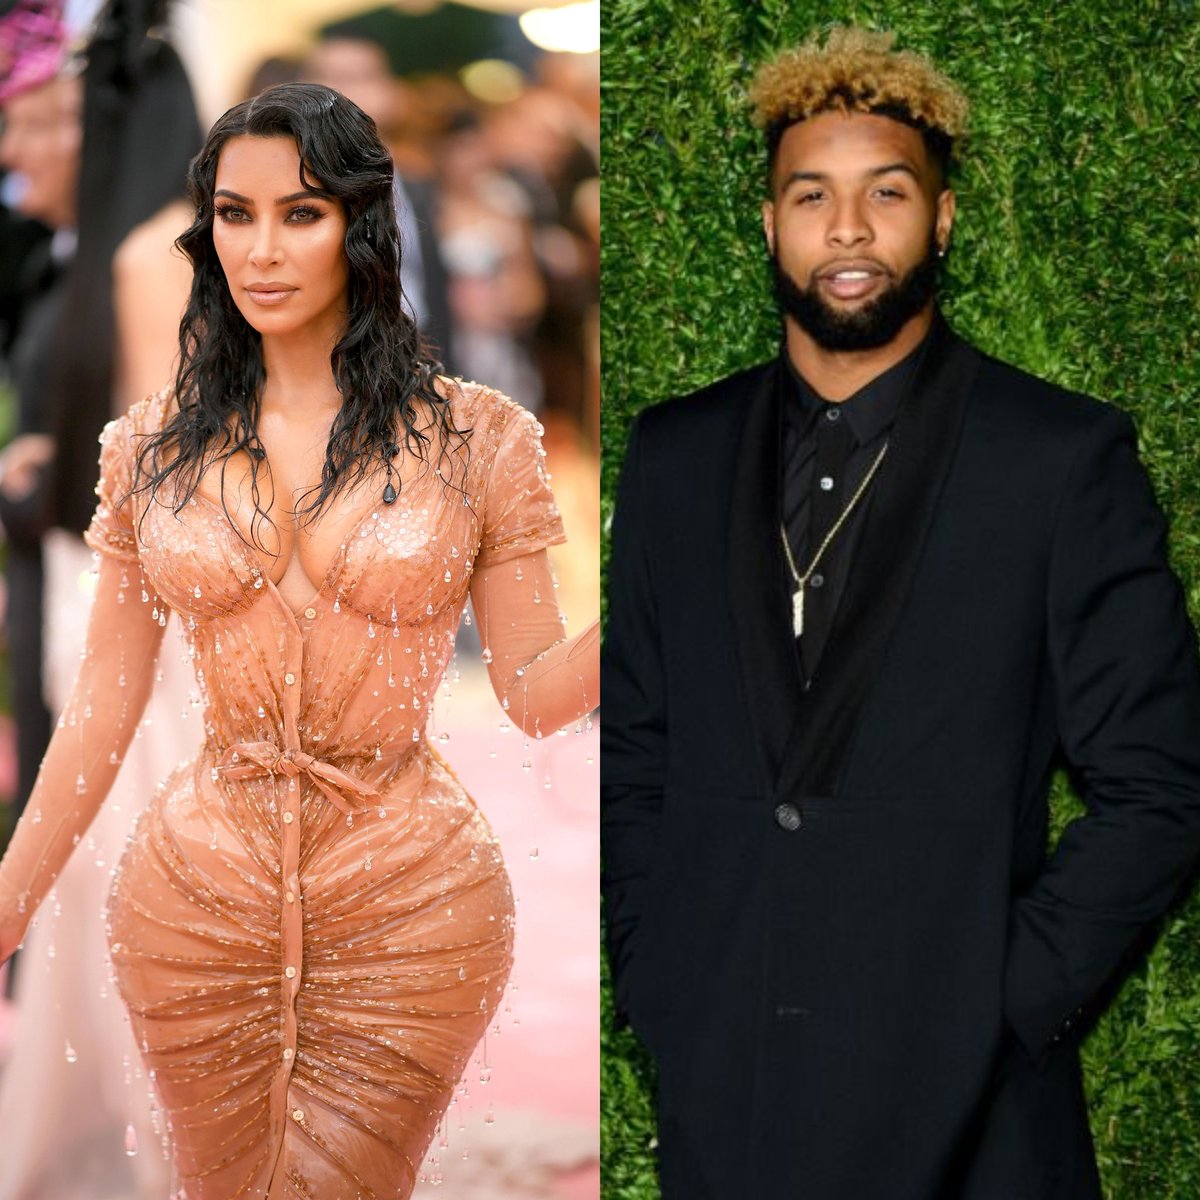 Once again Kim Kardashian has failed in another relationship, this time with Odell Beckham Jr This is typically of women with high penile mileage, they cease to be able to pairbond. Here's a list of some men she has dated: • Damon Thomas a music producer when she was 19 • Ray…